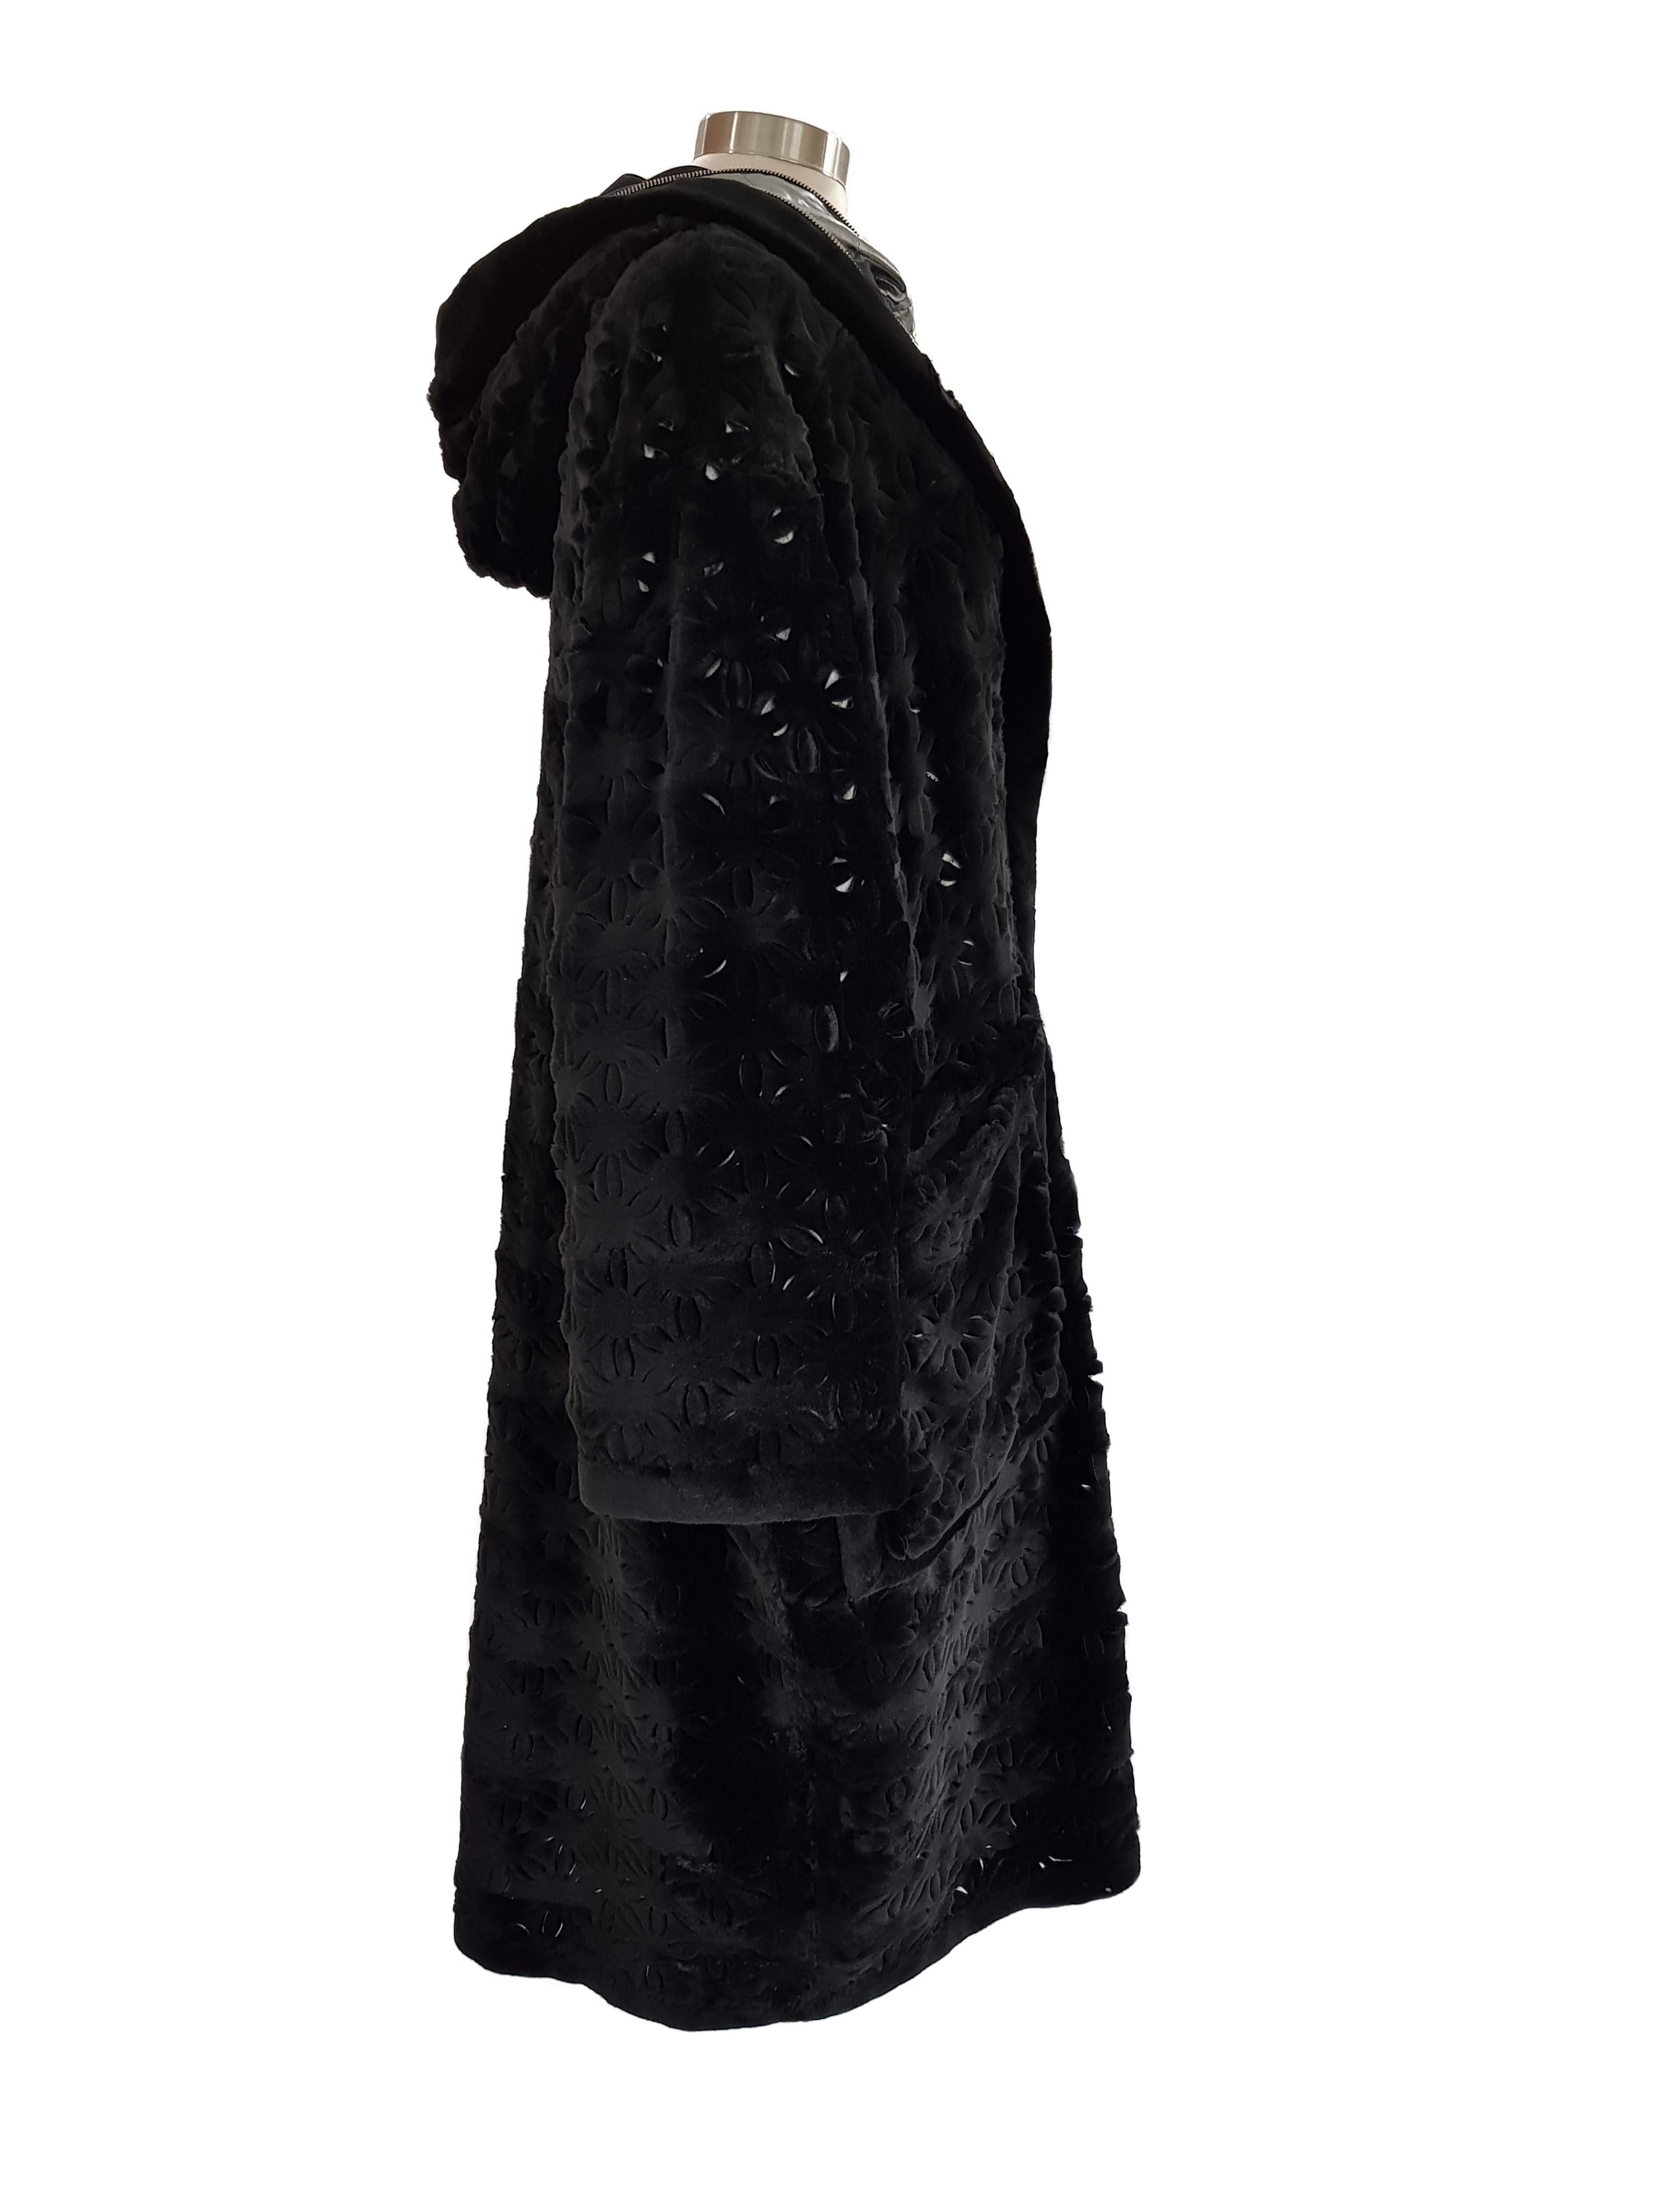 Helen Yarmak Sheared Black Mink Coat  In New Condition For Sale In New York, NY